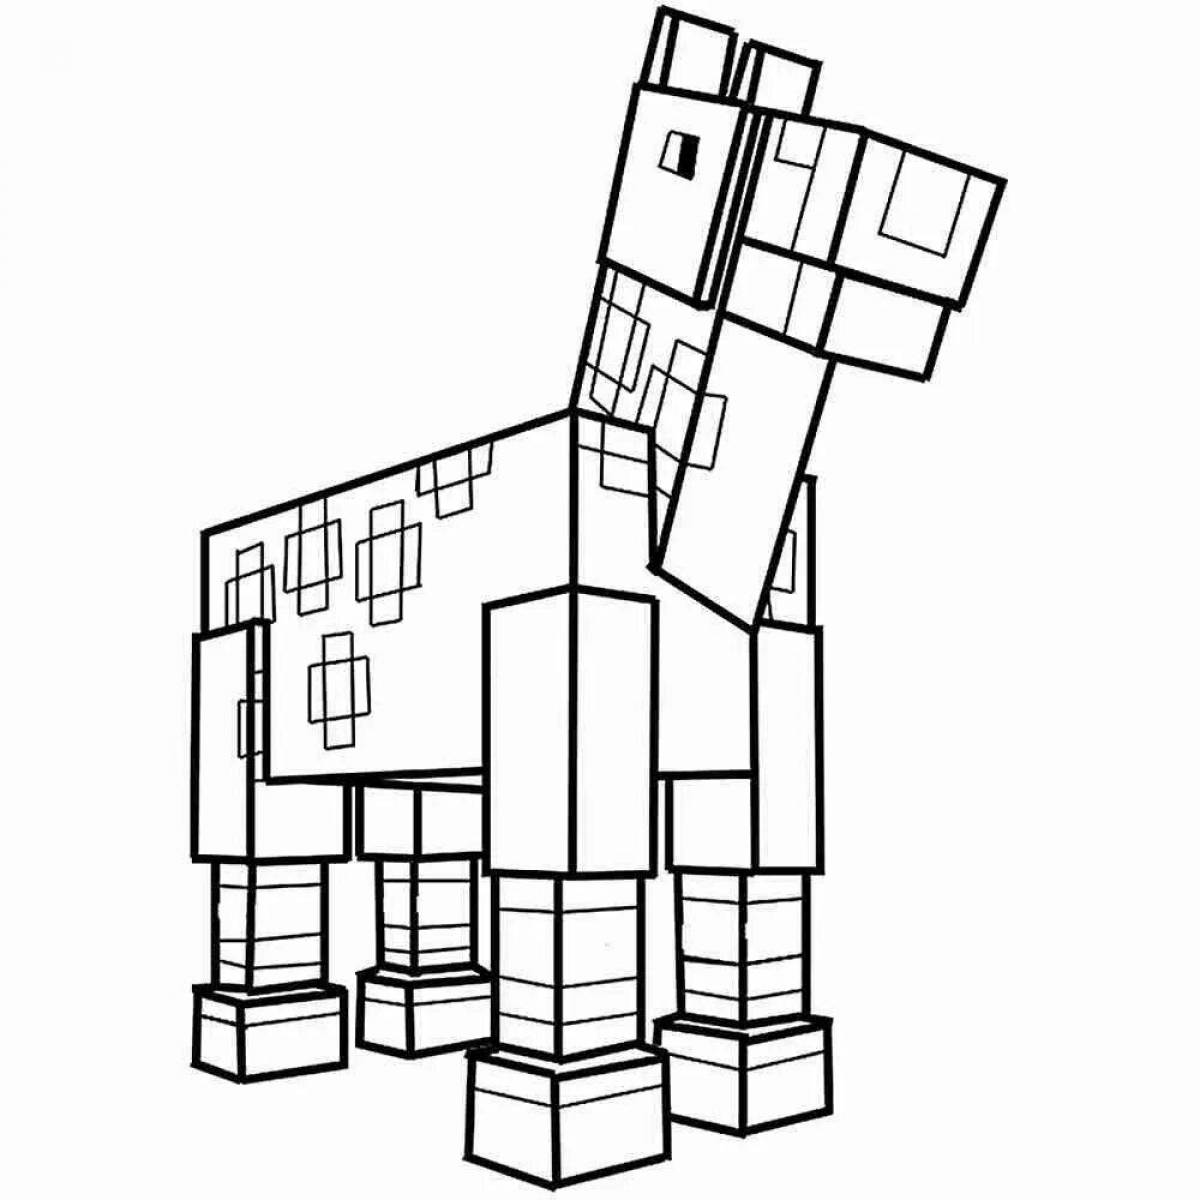 Playful minecraft robot coloring page